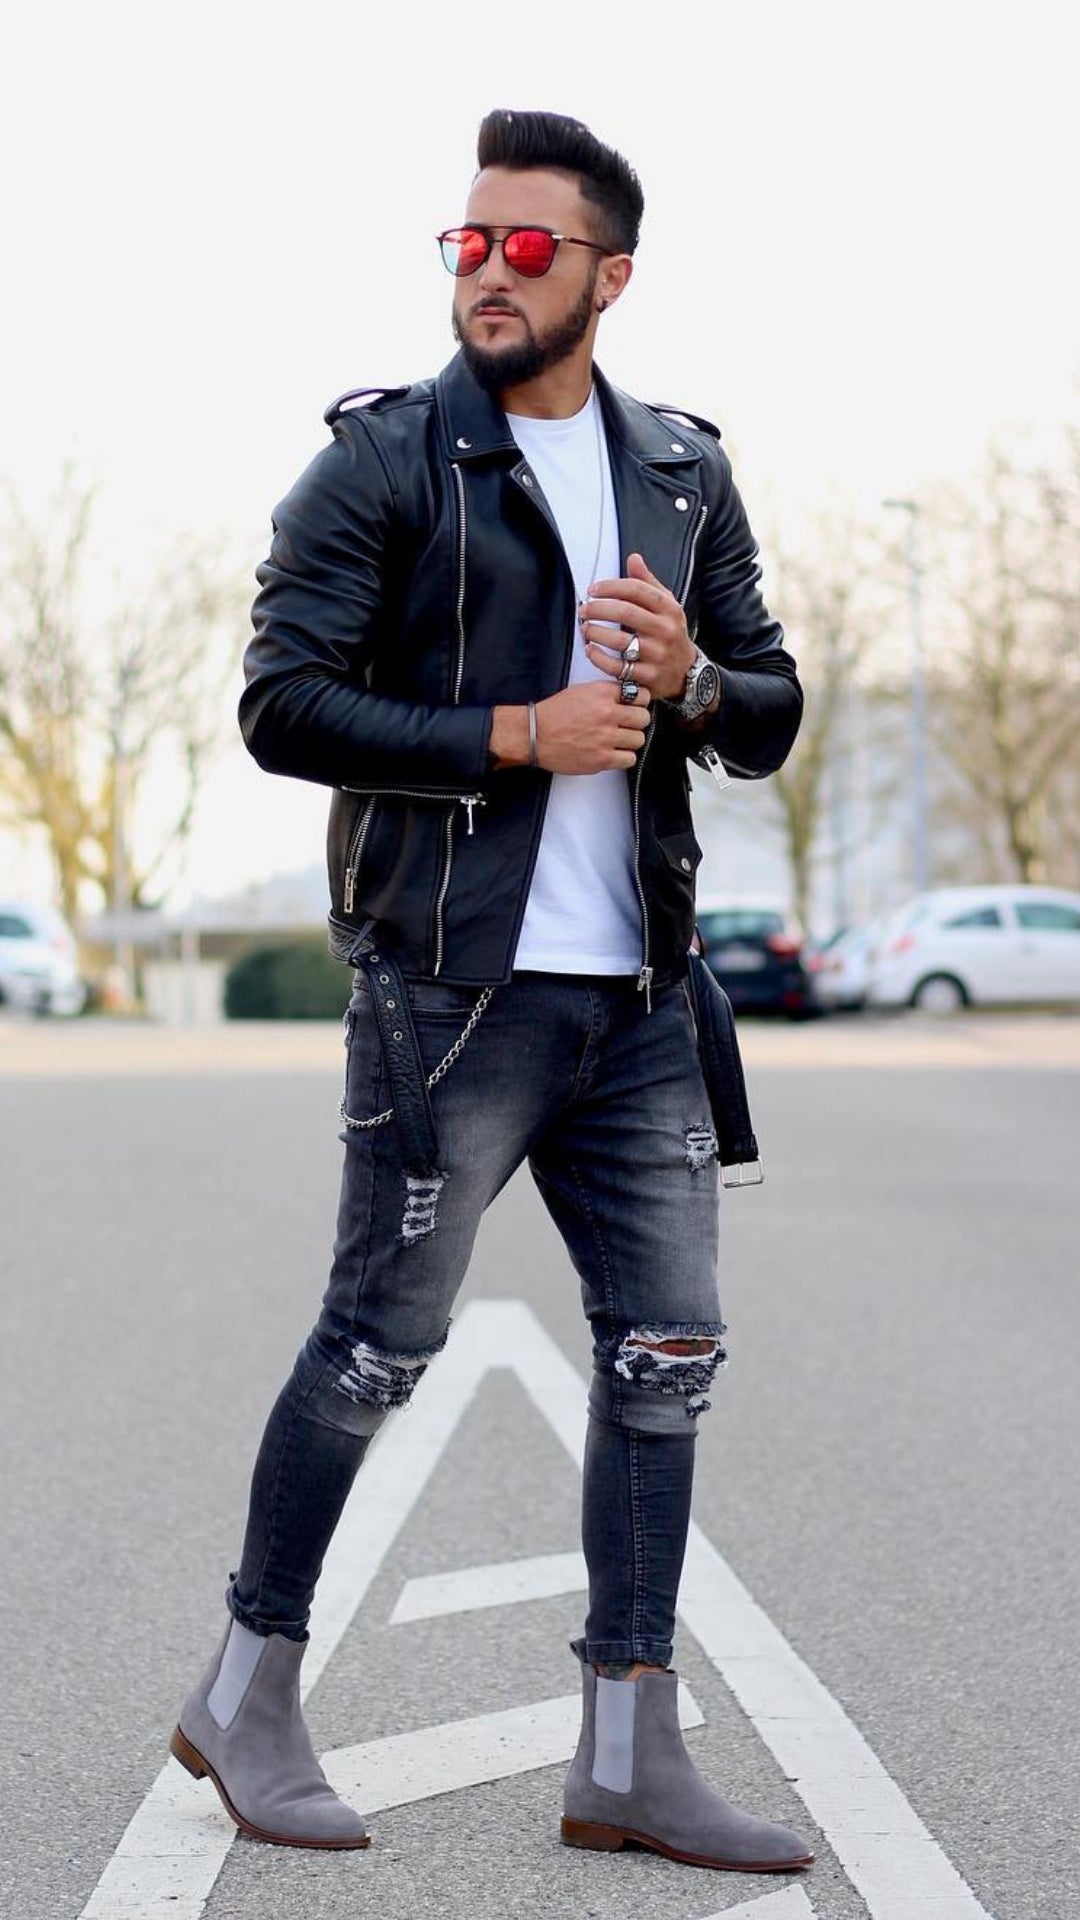 5 Leather Jacket Outfits You Haven't Seen Yet #leather #jacket #outfits #mens #fashion